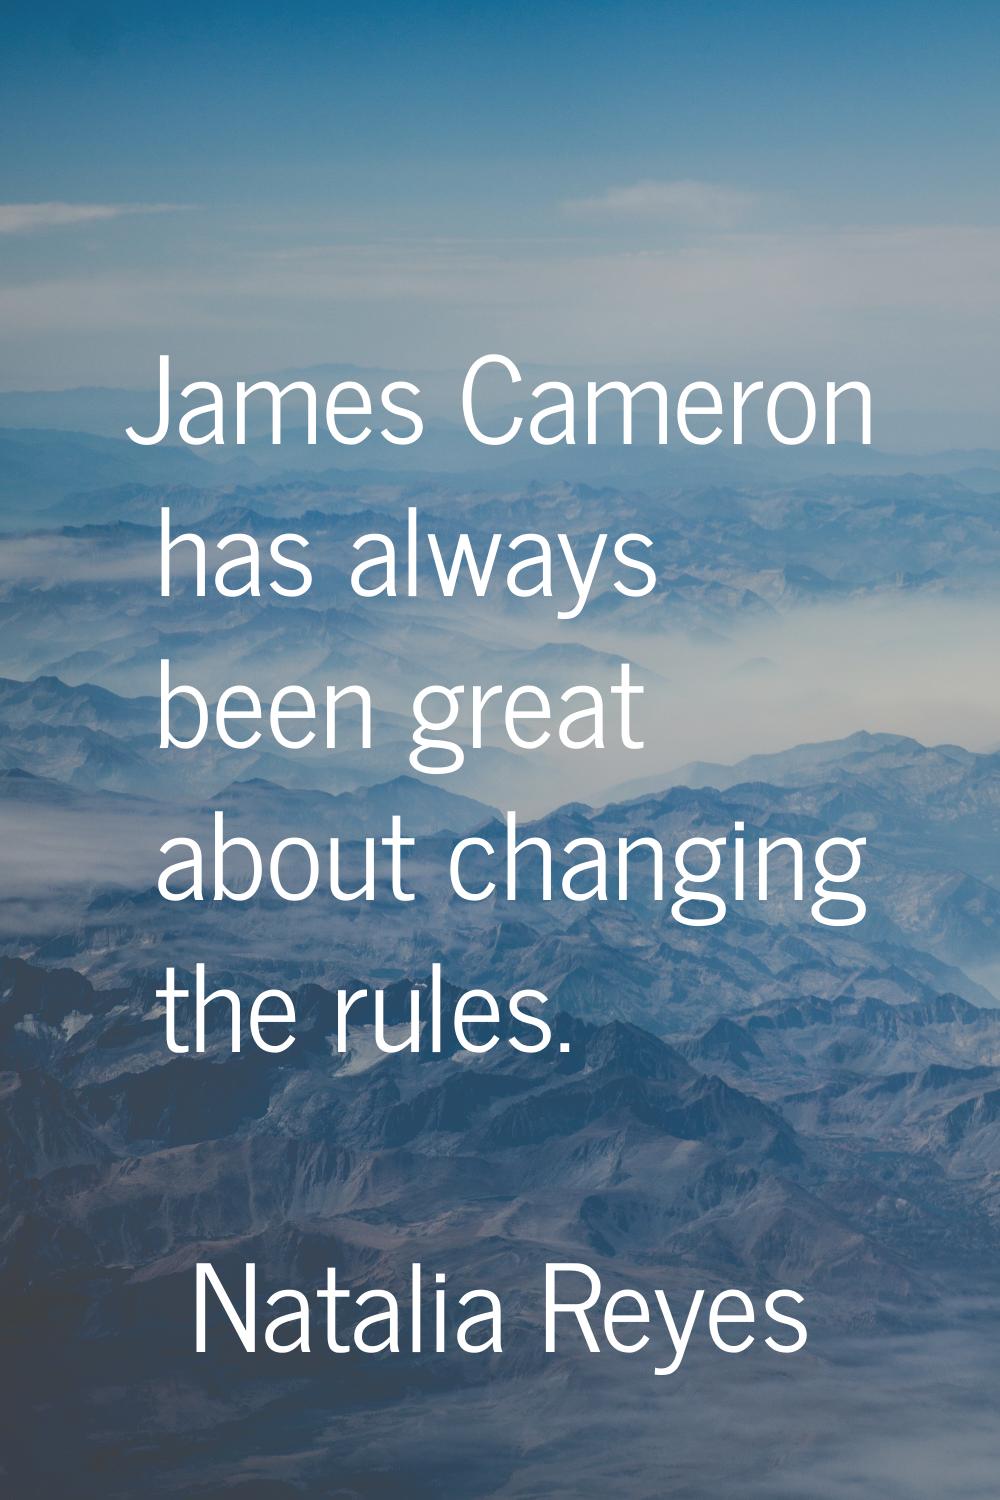 James Cameron has always been great about changing the rules.